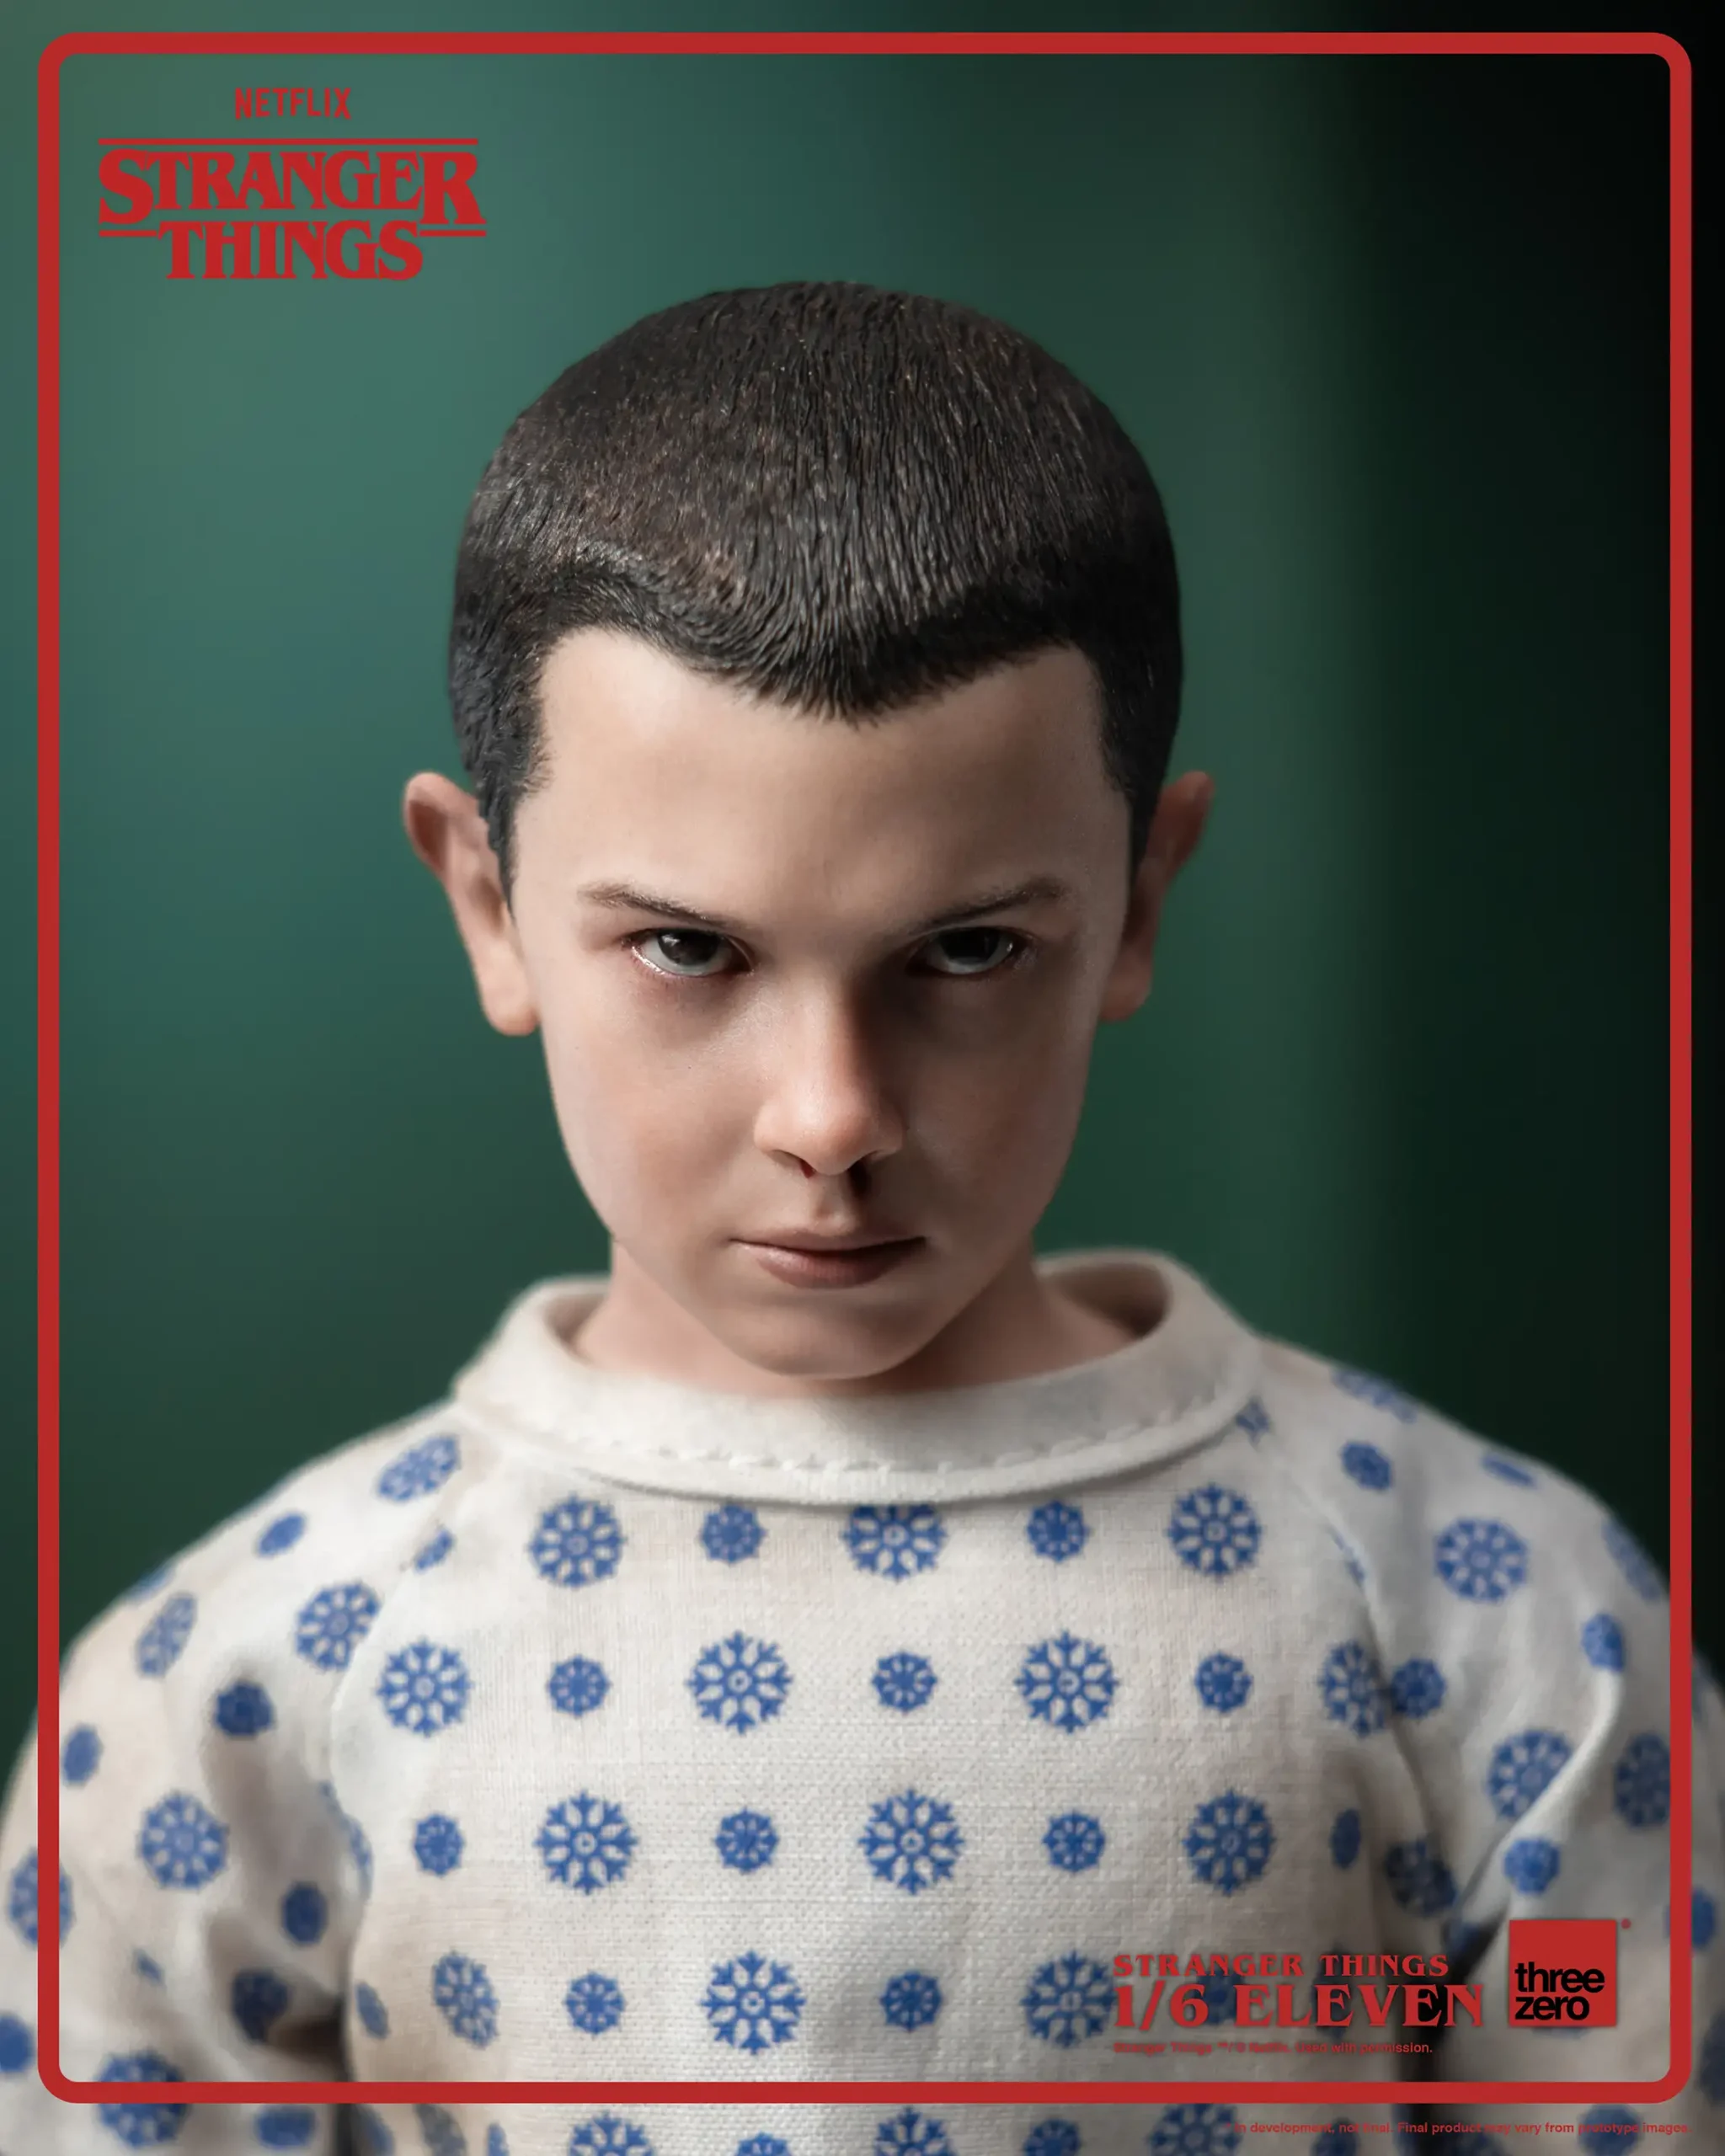 Stranger Things: Where Did Eleven Get Her Name?